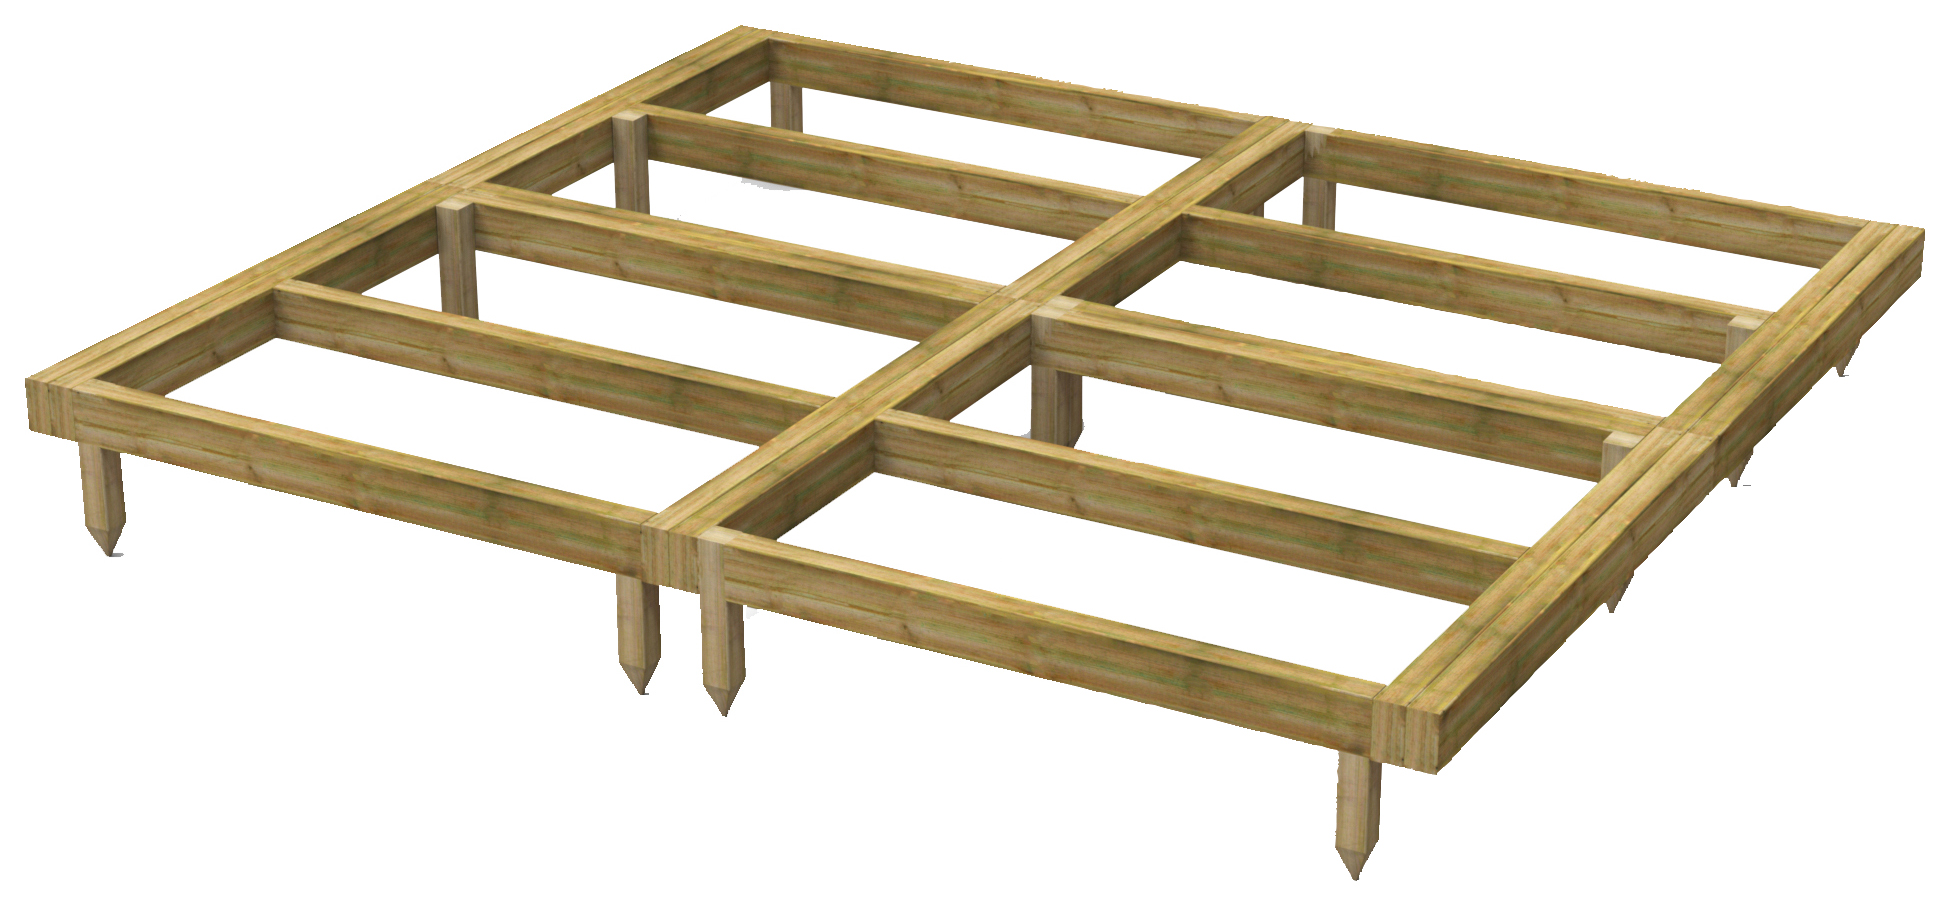 Image of Power Sheds 8 x 8ft Pressure Treated Garden Building Base Kit